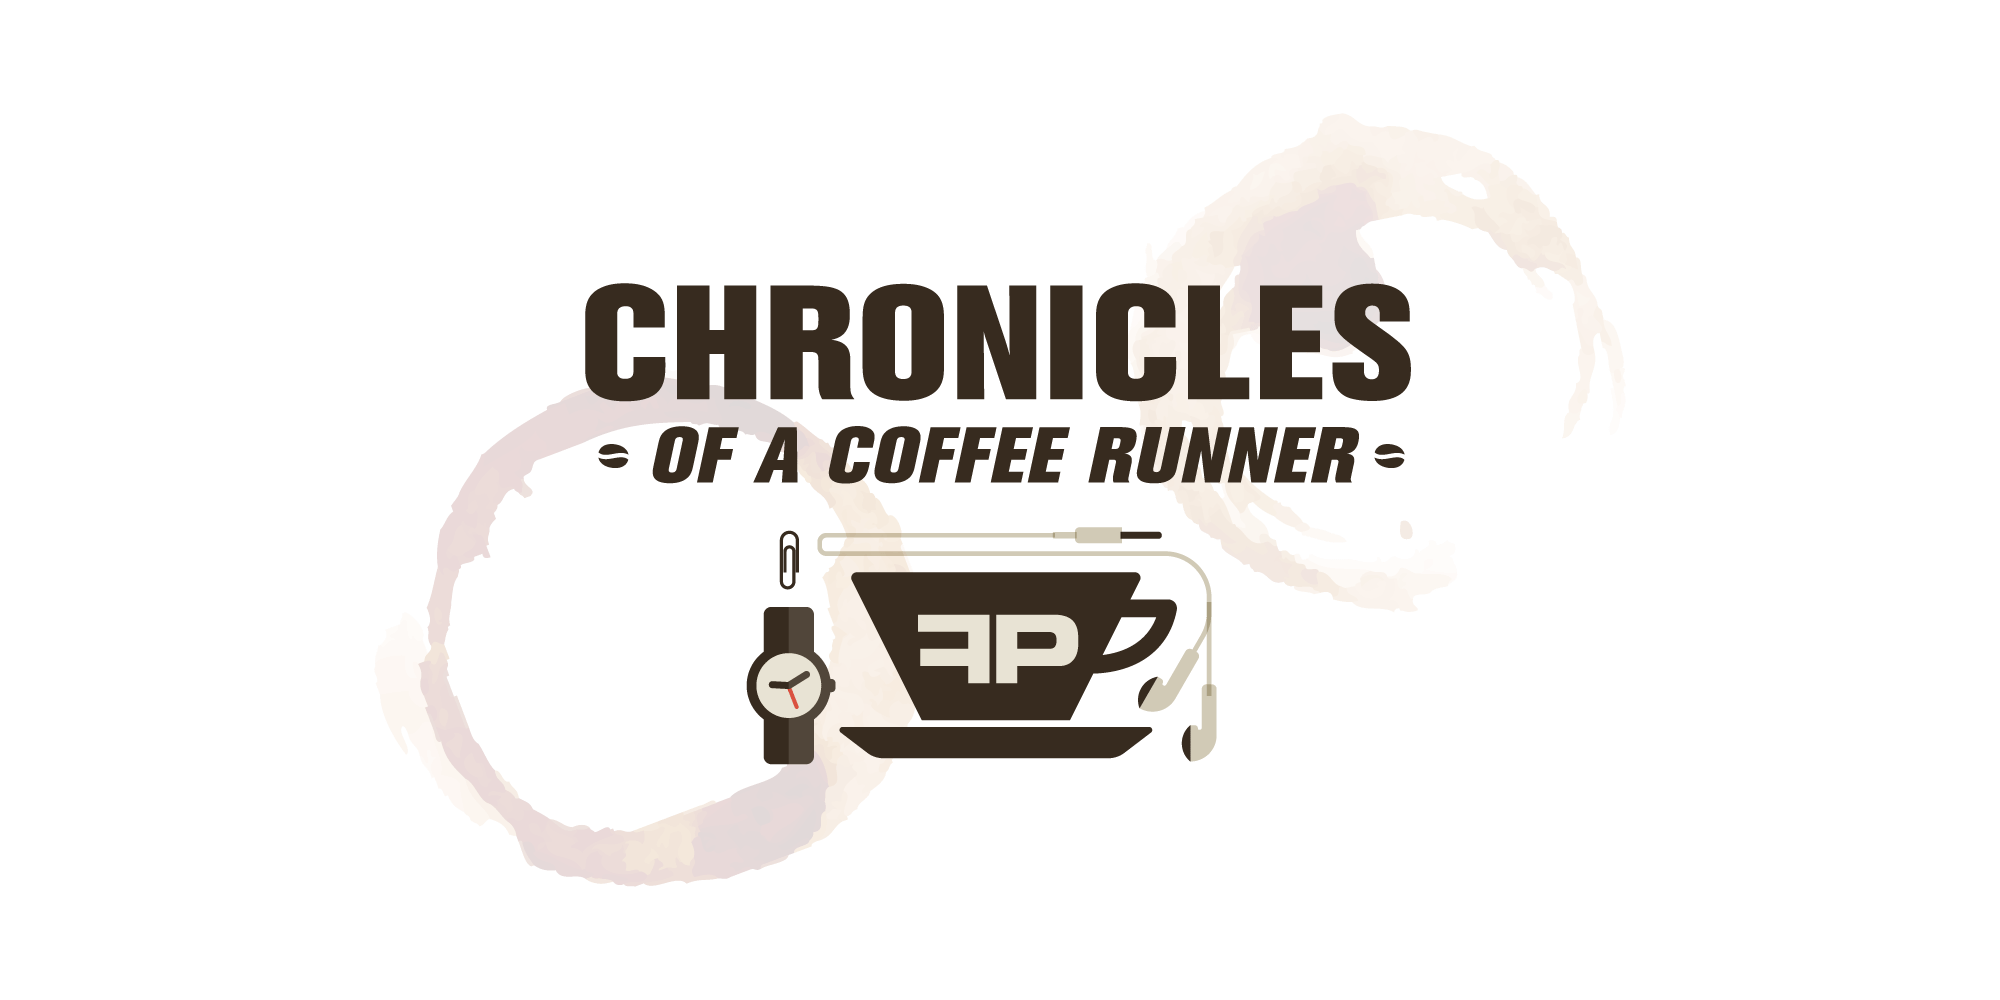 coffeerunner blog header - The Chronicles of a coffee runner part deux: Business or Buzzyness?